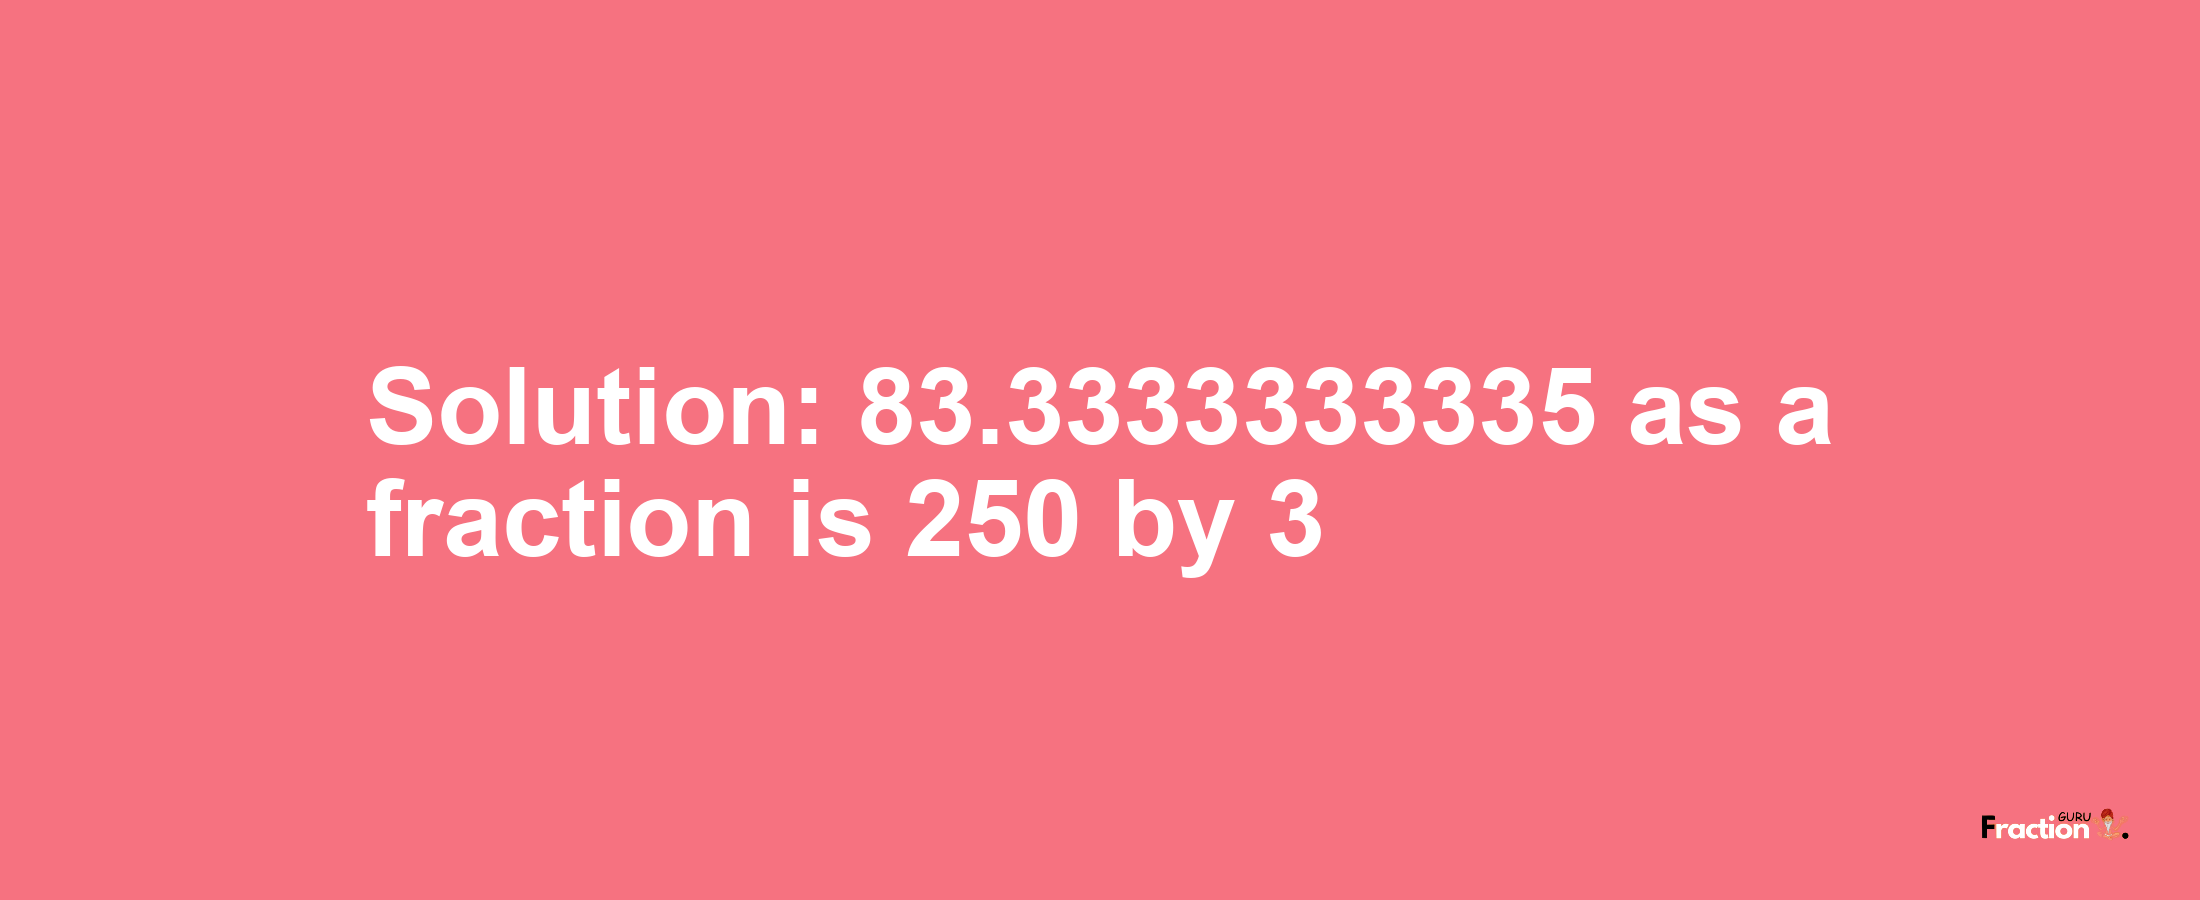 Solution:83.3333333335 as a fraction is 250/3